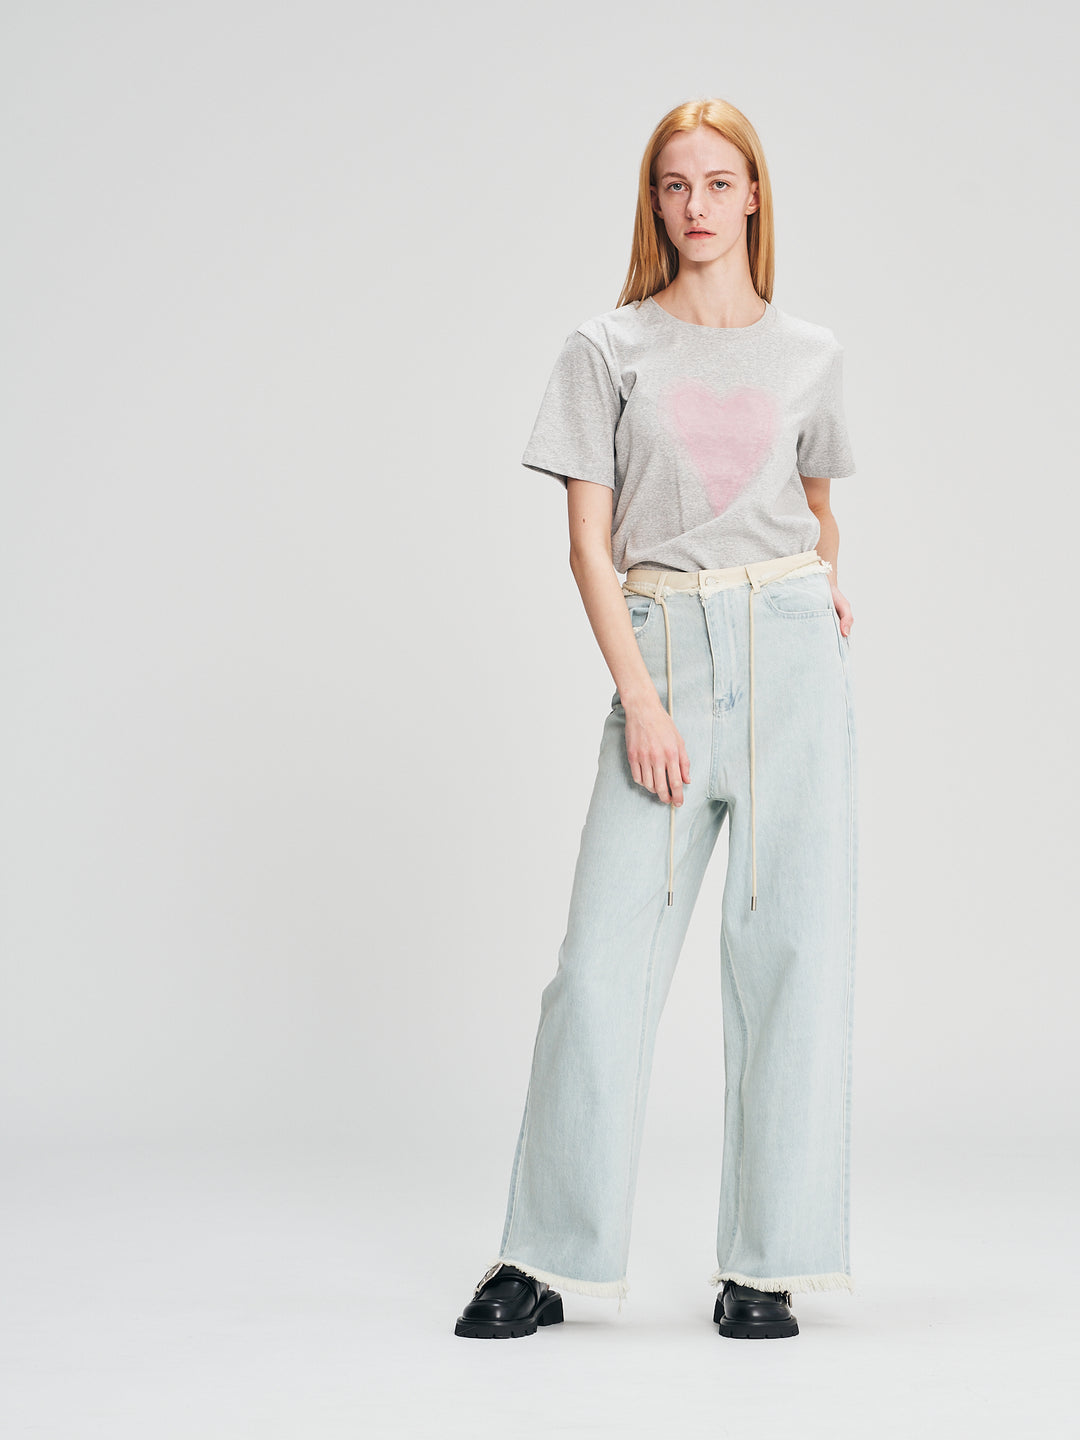 An image of a  Grey-One-Size 25882 Tulle Heart T-Shirt by  Mirra Masa